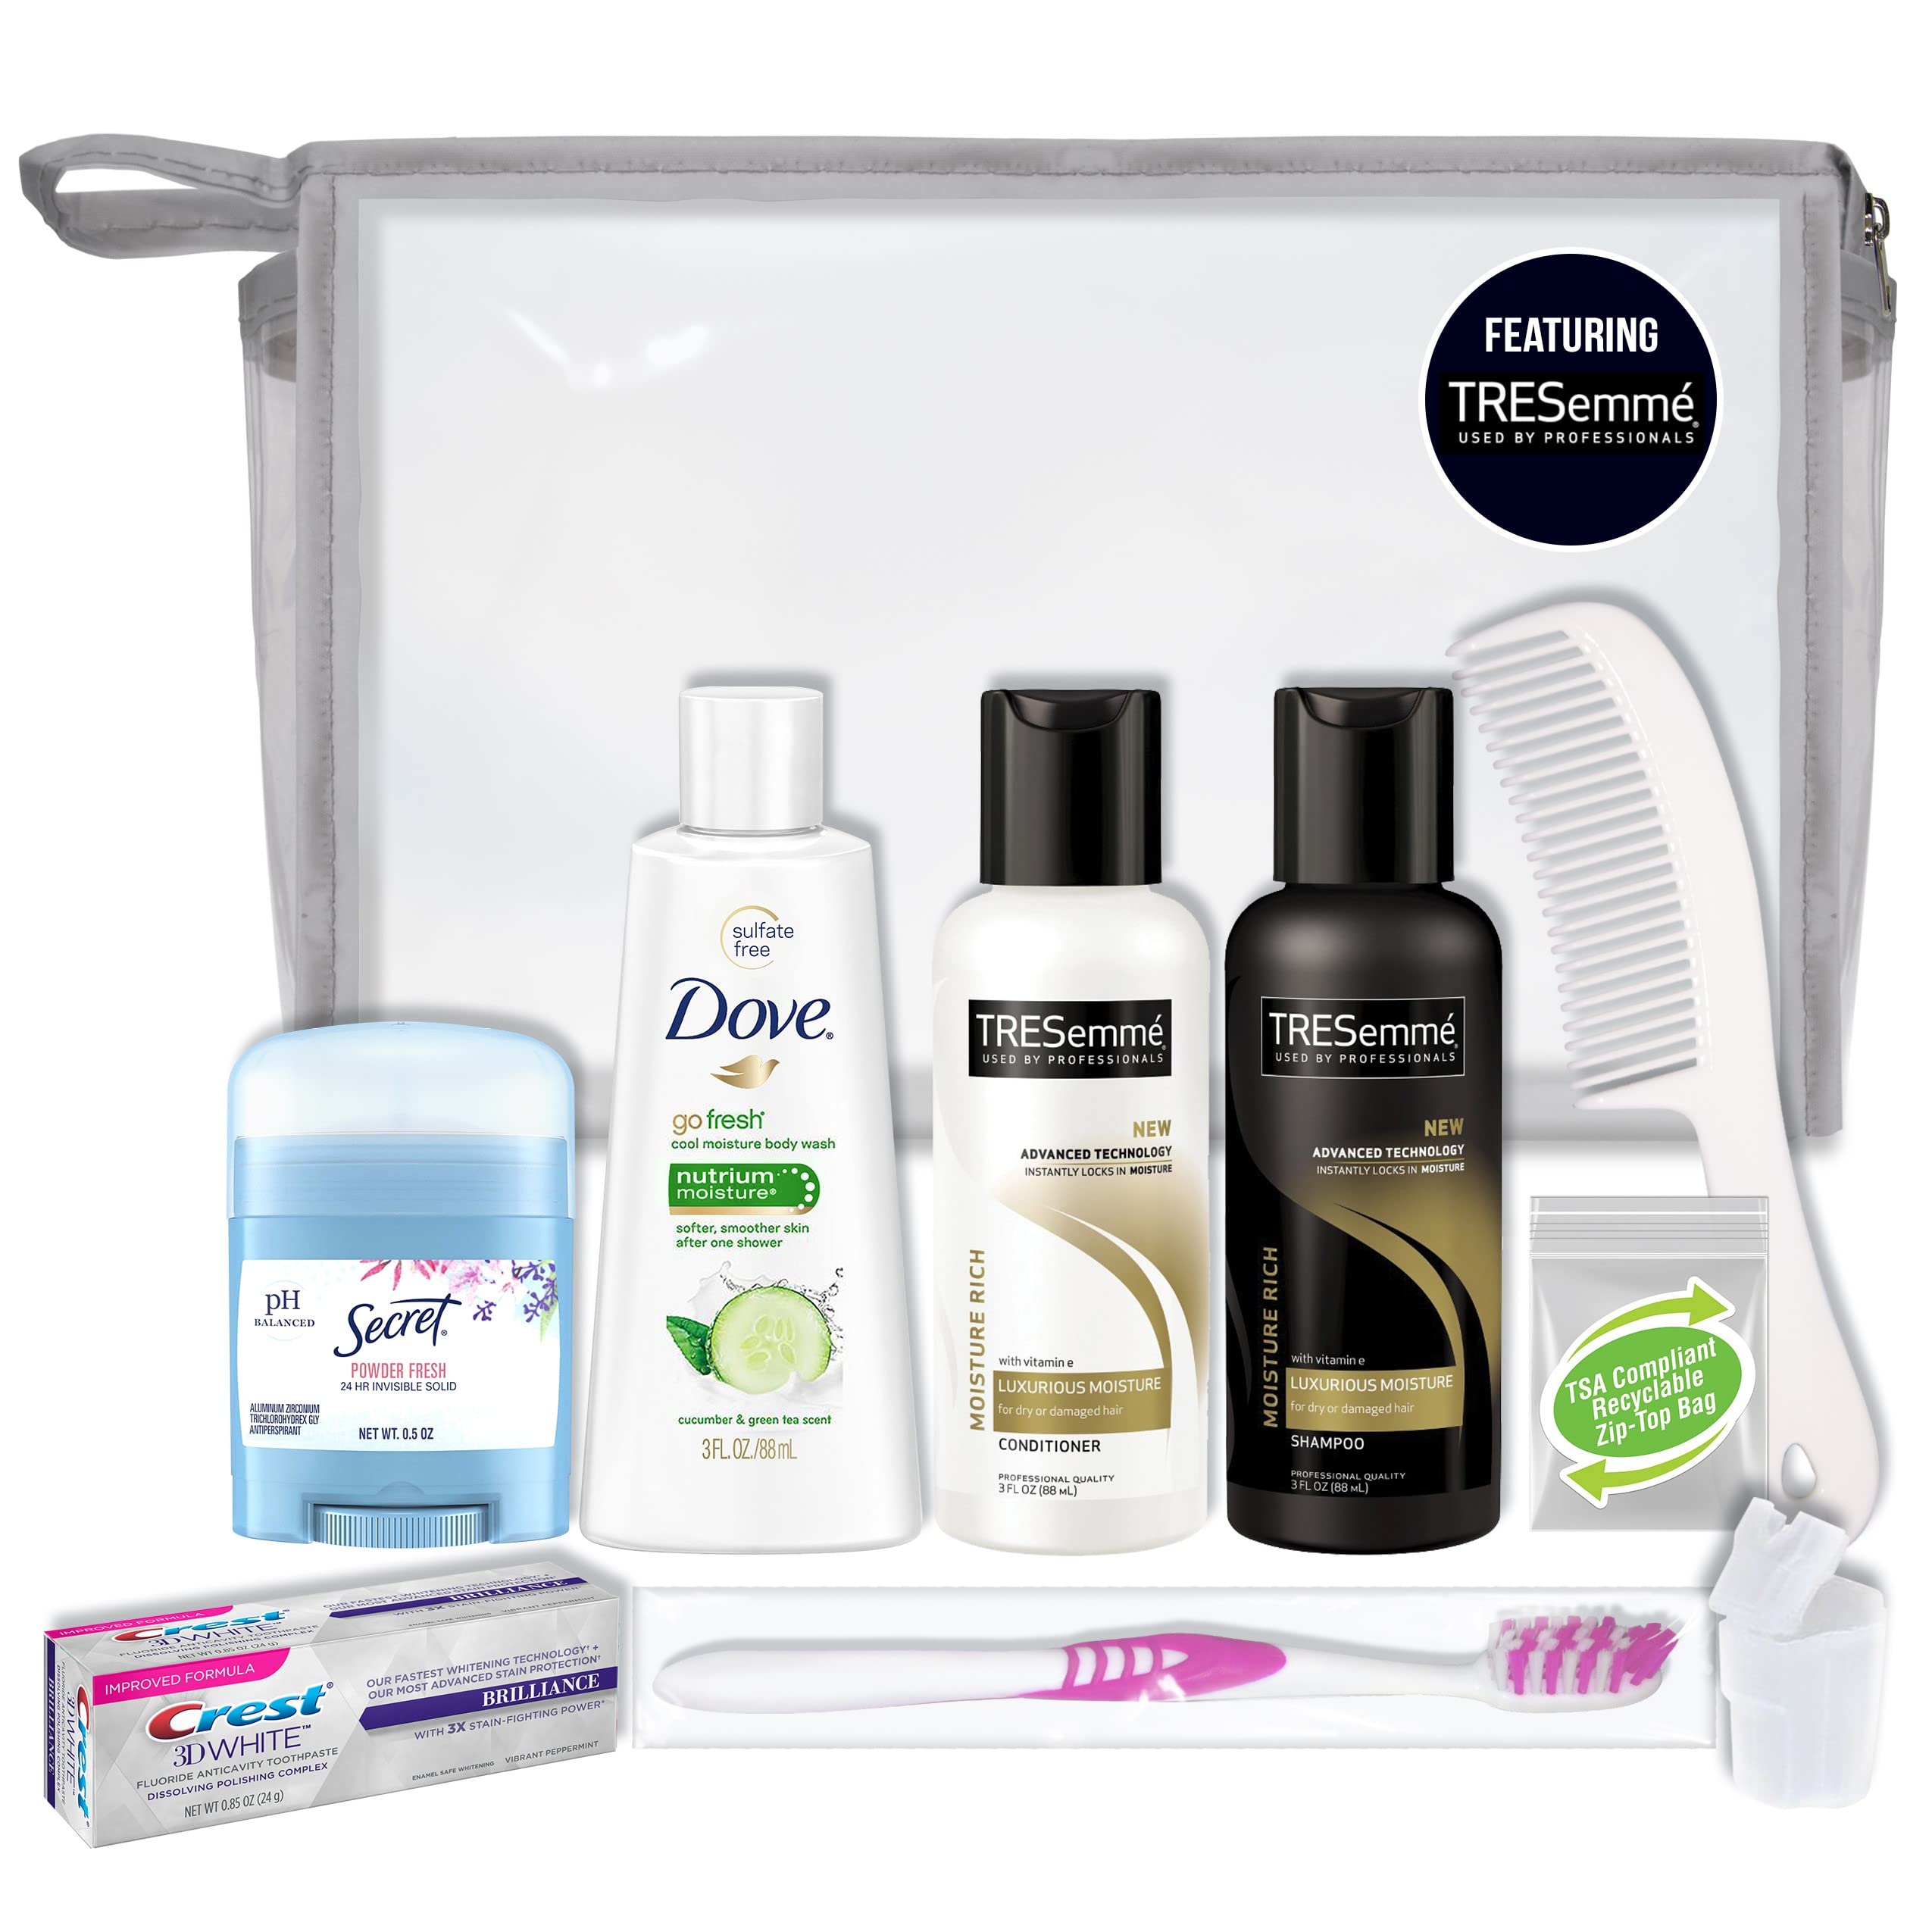 Convenience Kits international 10 PC Deluxe Kit, Featuring: Tresemme Hair and Dove Body Travel-Size Products, Silver